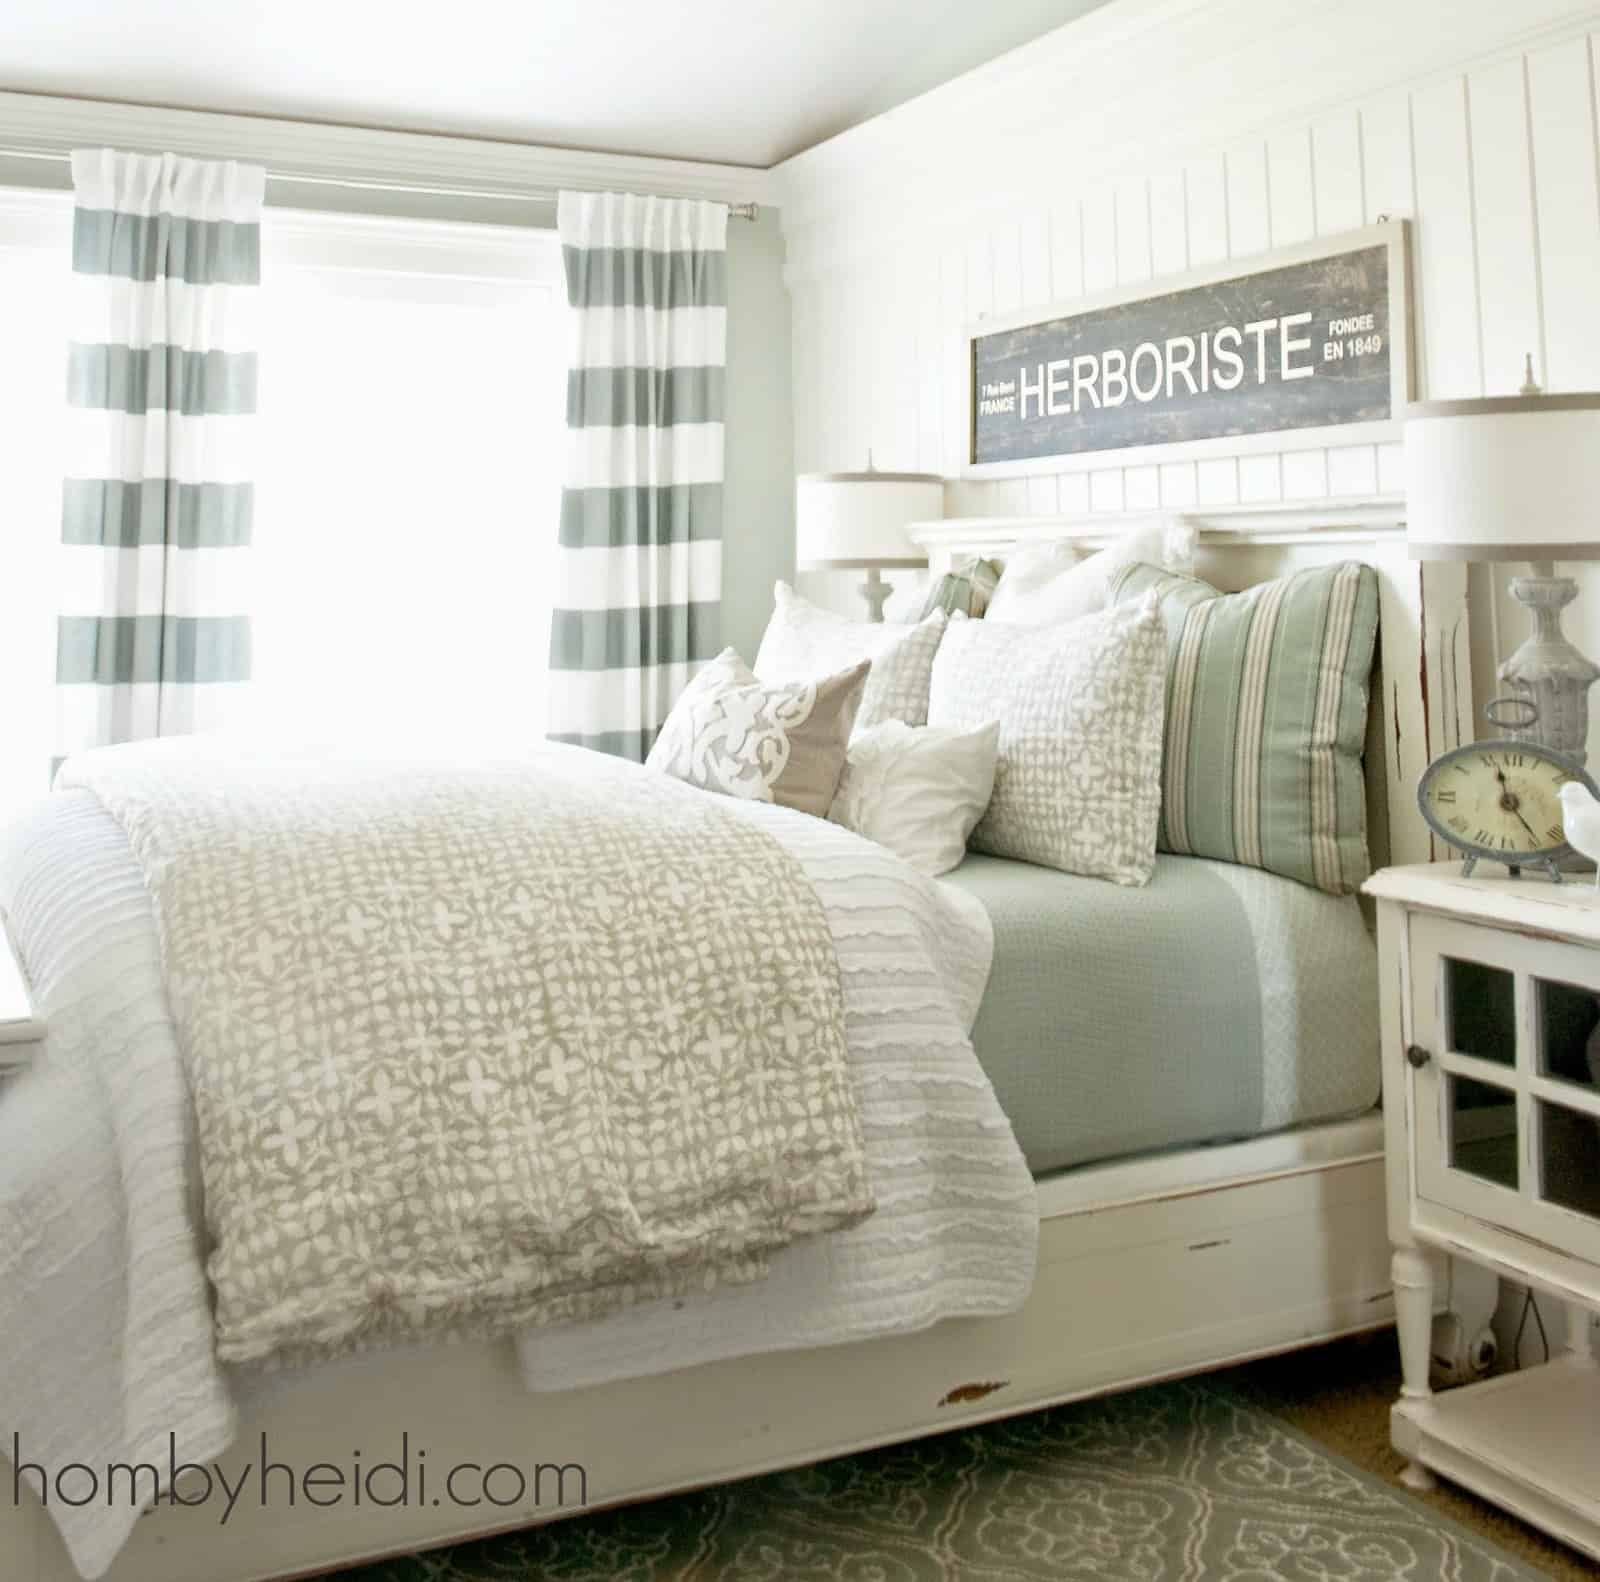 Great Tips for how to add style to a small bedroom. If you must have patterned bedding, keeping it subtle and not overly large will cut down on the busy look. This is a wonderful mix of patterns, solids and colors.